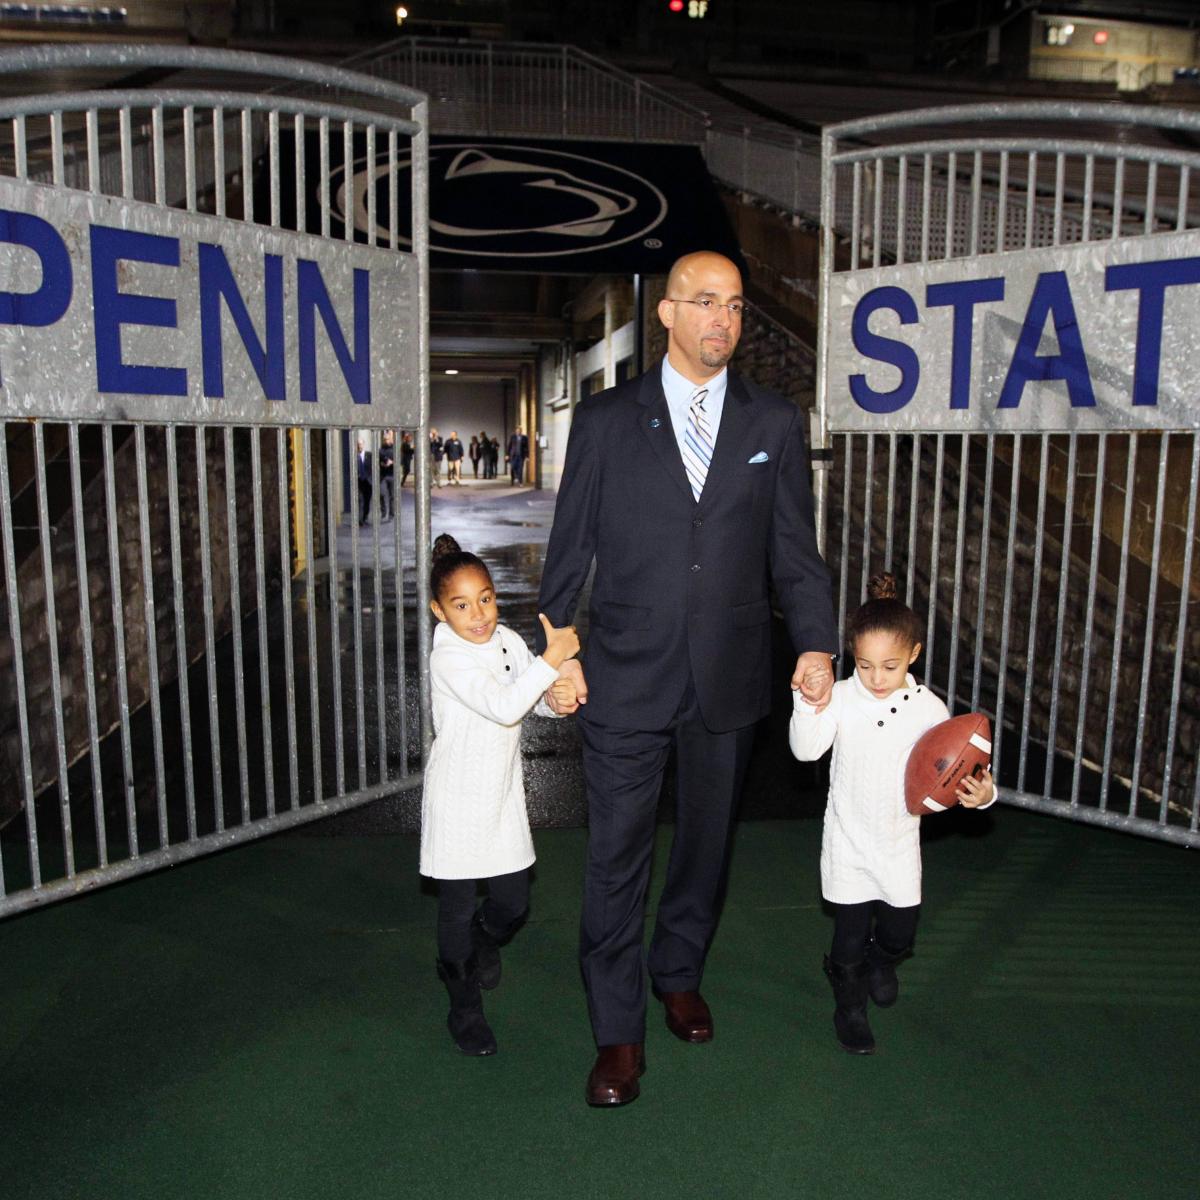 Penn State Football Everything You Need to Know for National Signing